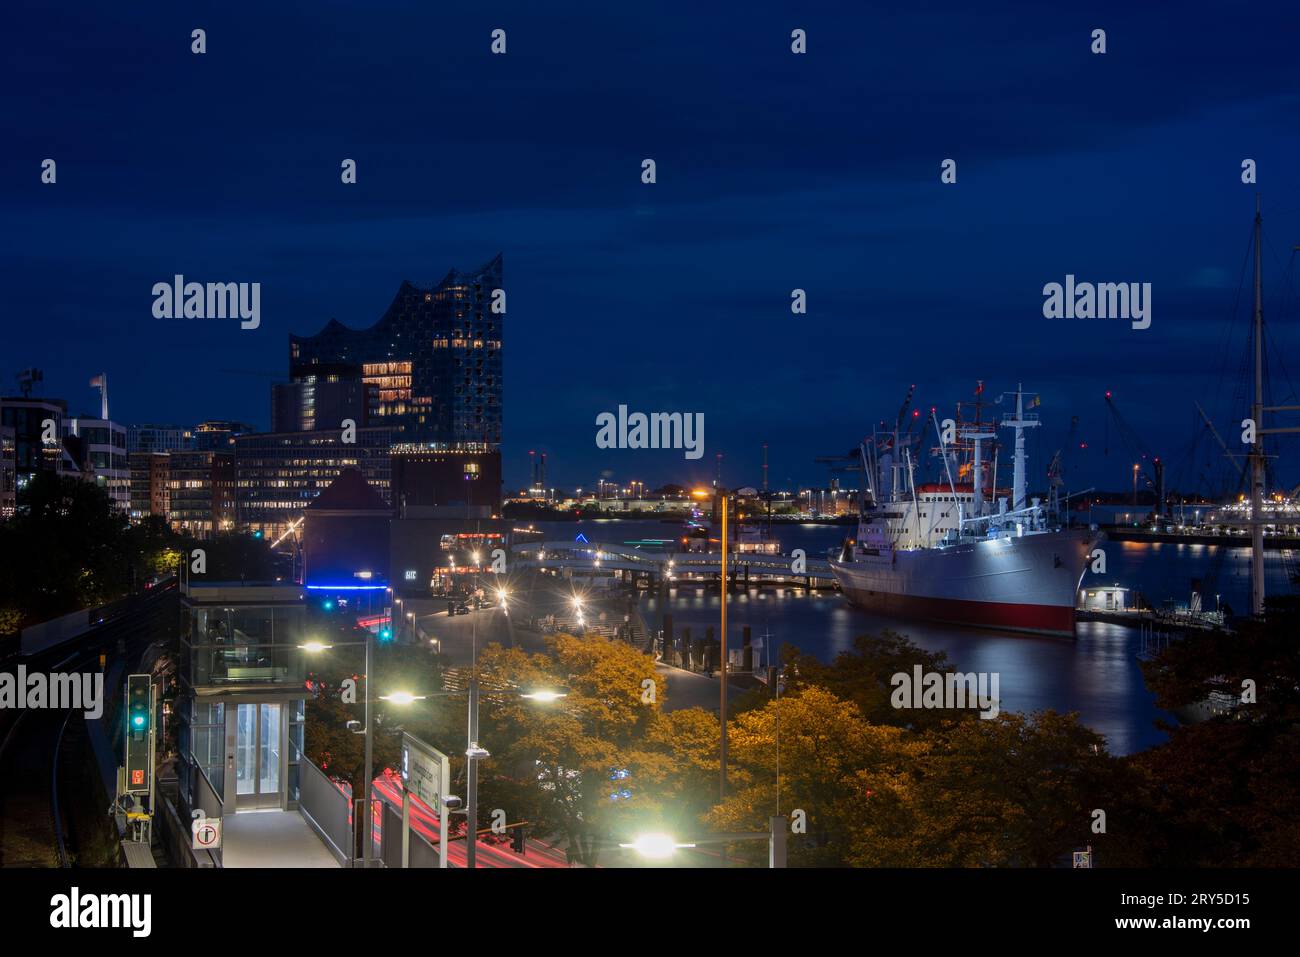 View of the Elbphilharmonie at blue hour. The museum ship Cap San Diego can be seen to the right Stock Photo